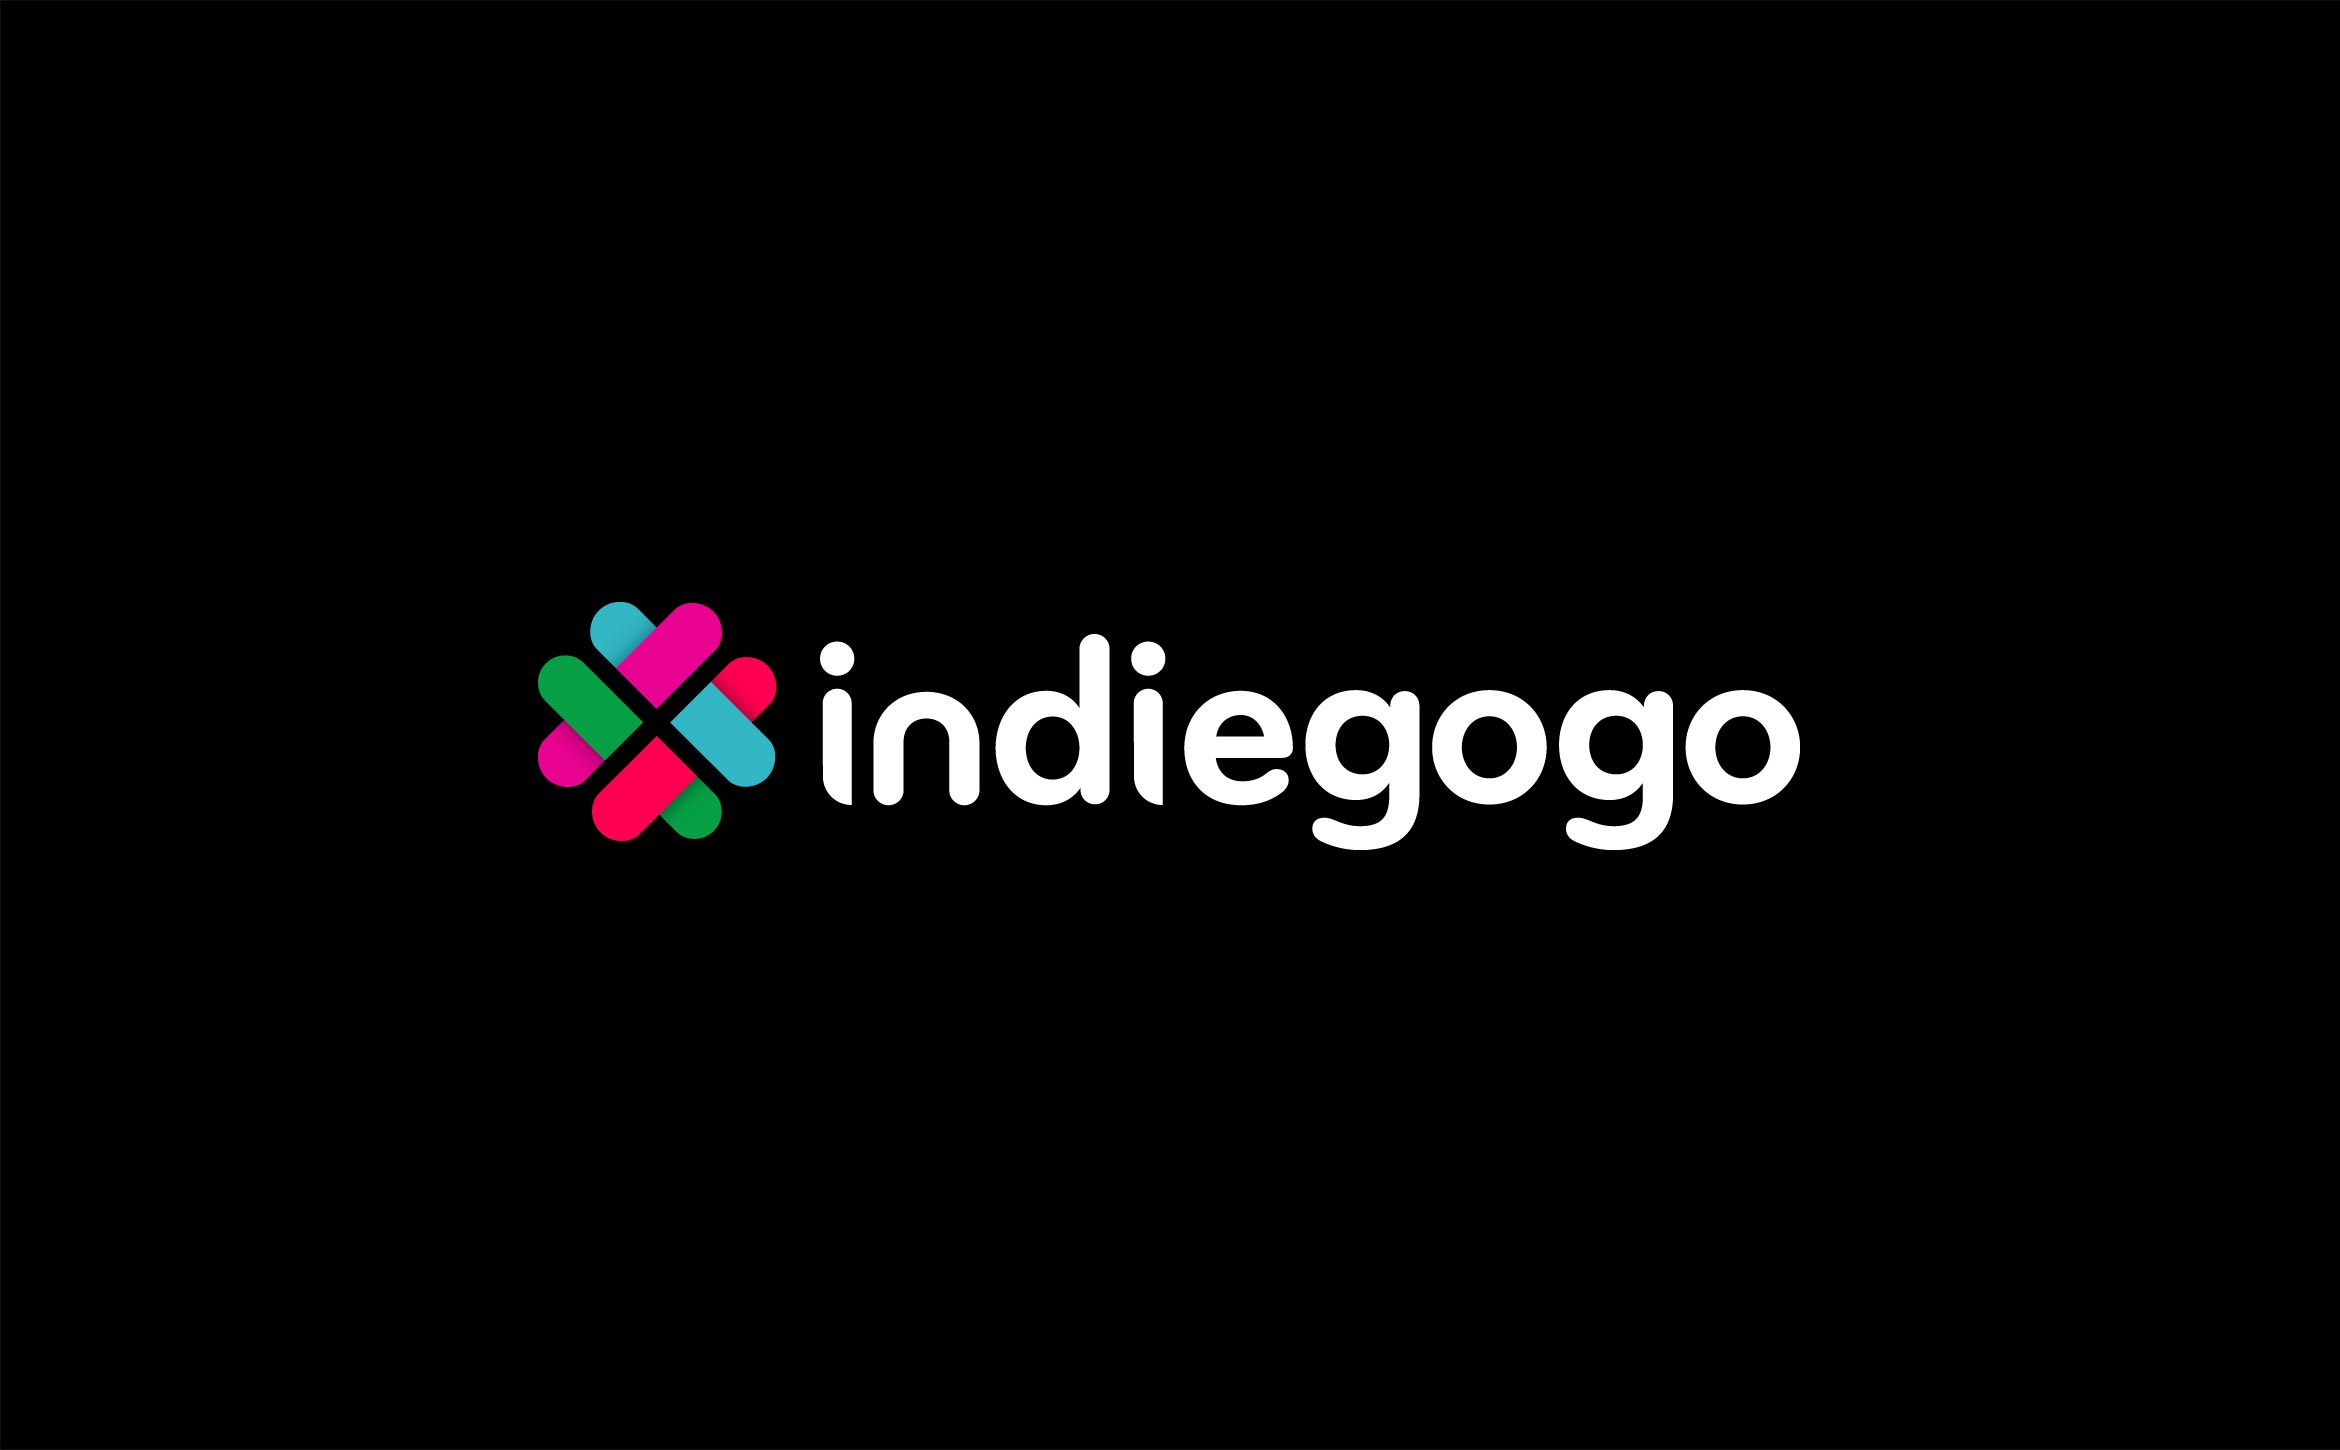 digital design logo for indiegogo with rounded typeface and overlapping lozenge shapes in 4 colors green, cyan, magenta and violet